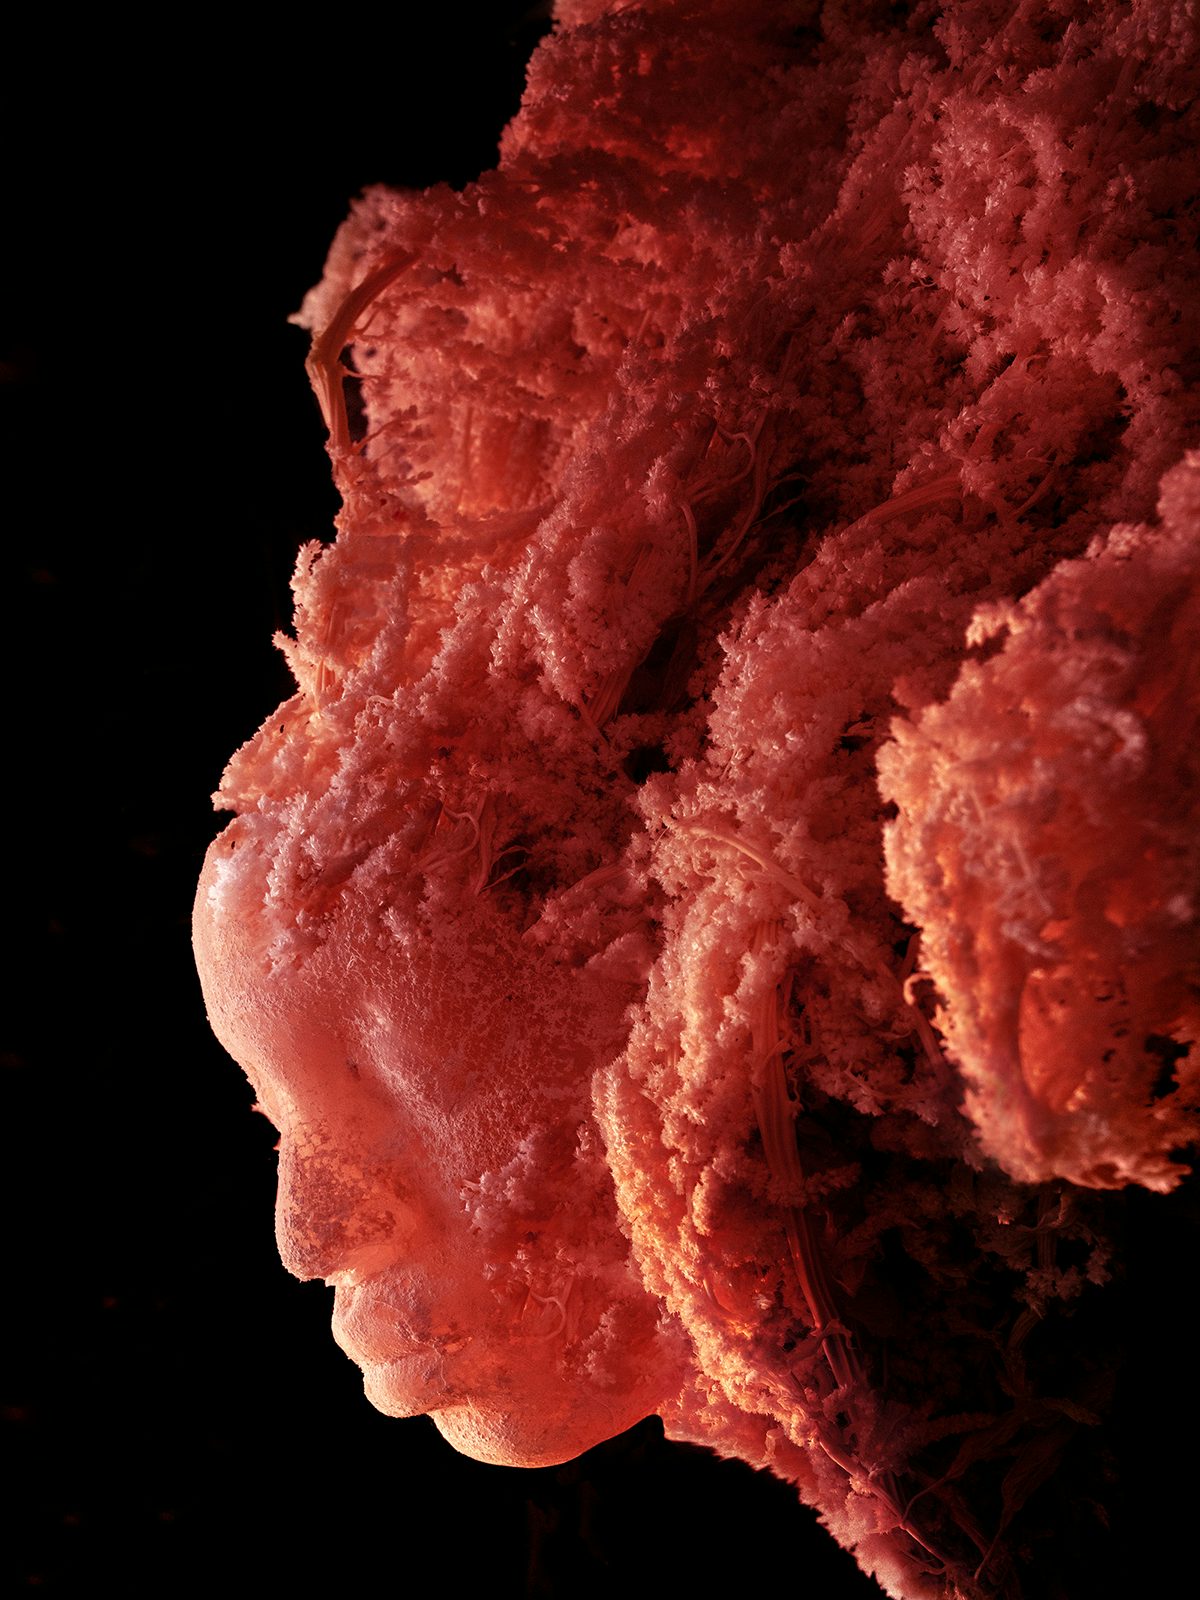 Image by David Uzochukwu shows the shape of a person's face rendered in a coral-like texture